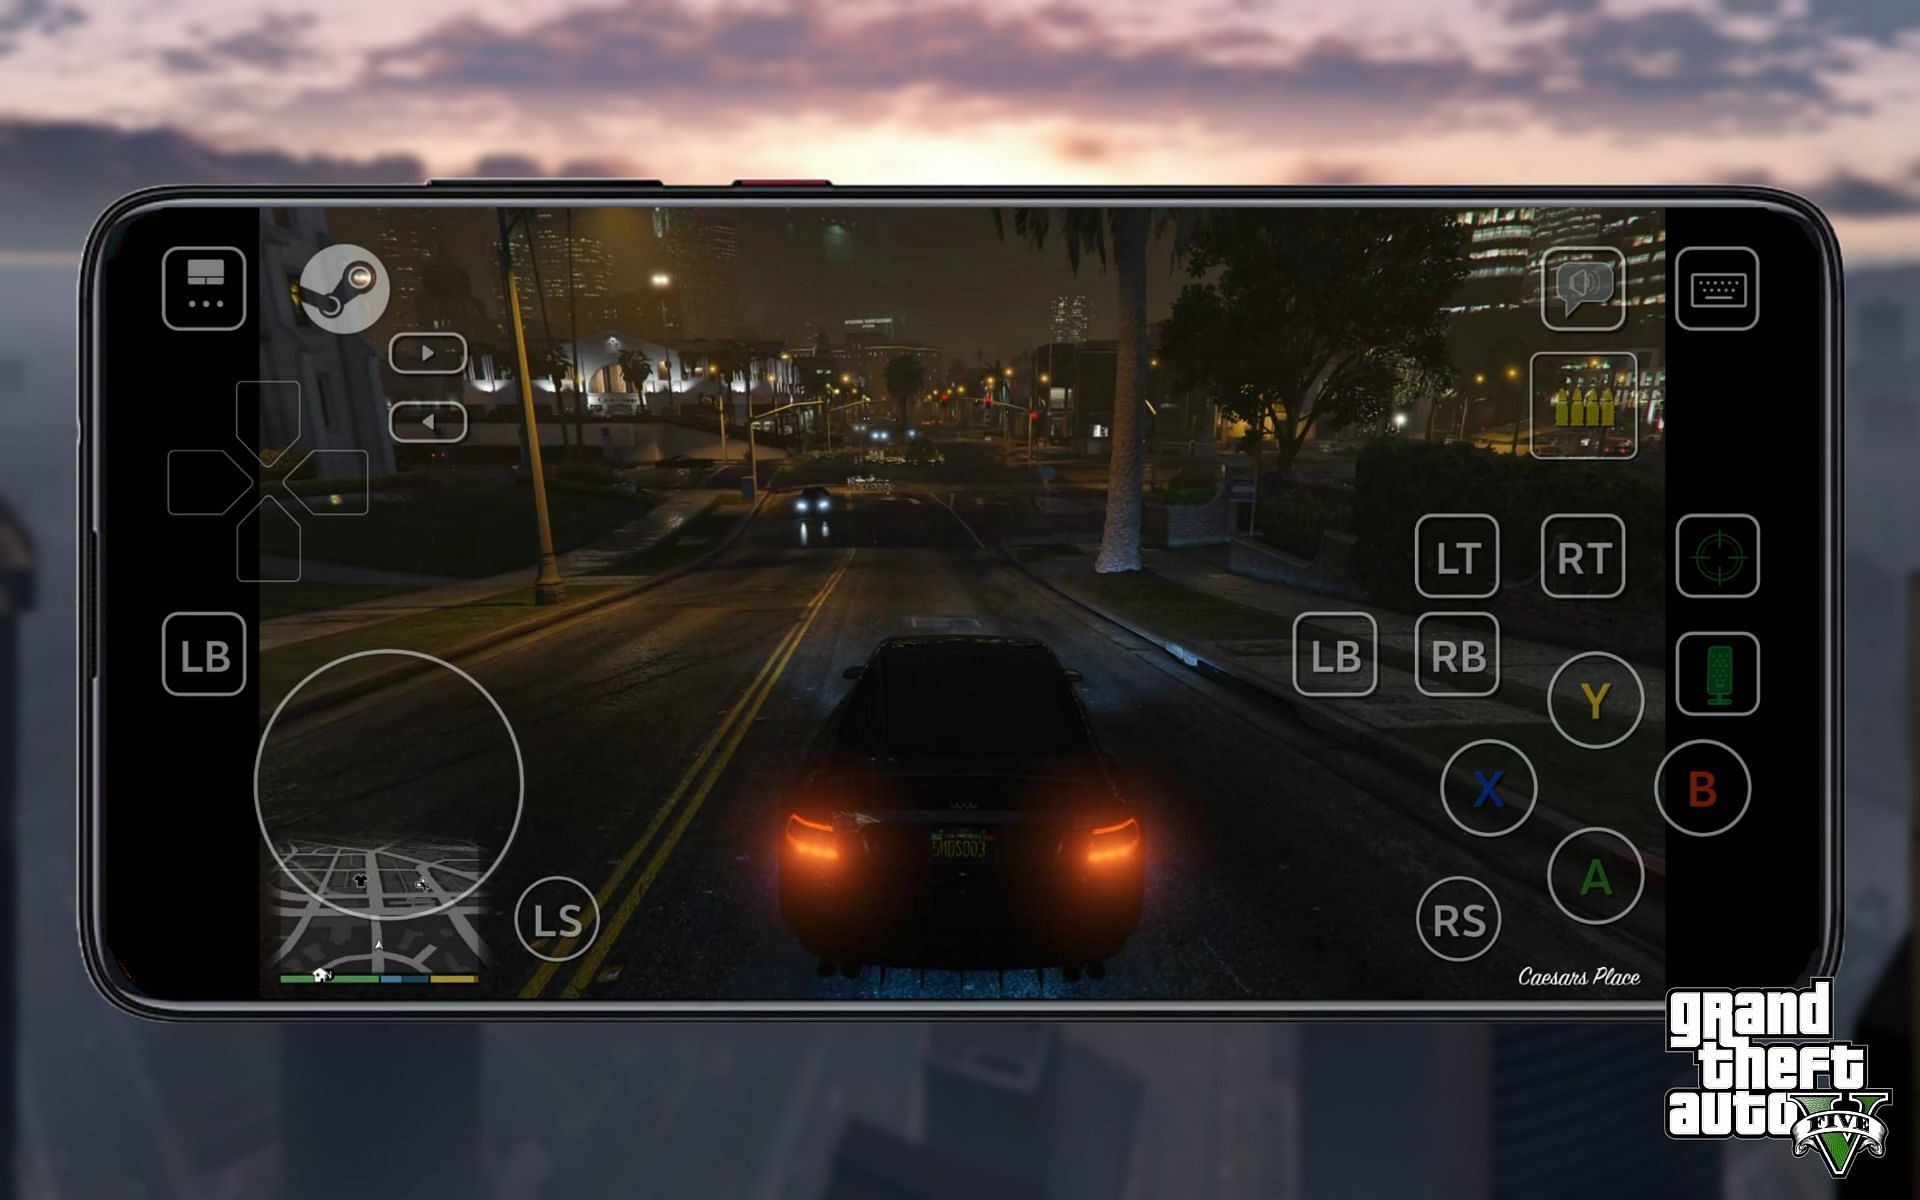 How to download GTA 5 on phones using Steam Link in 2022